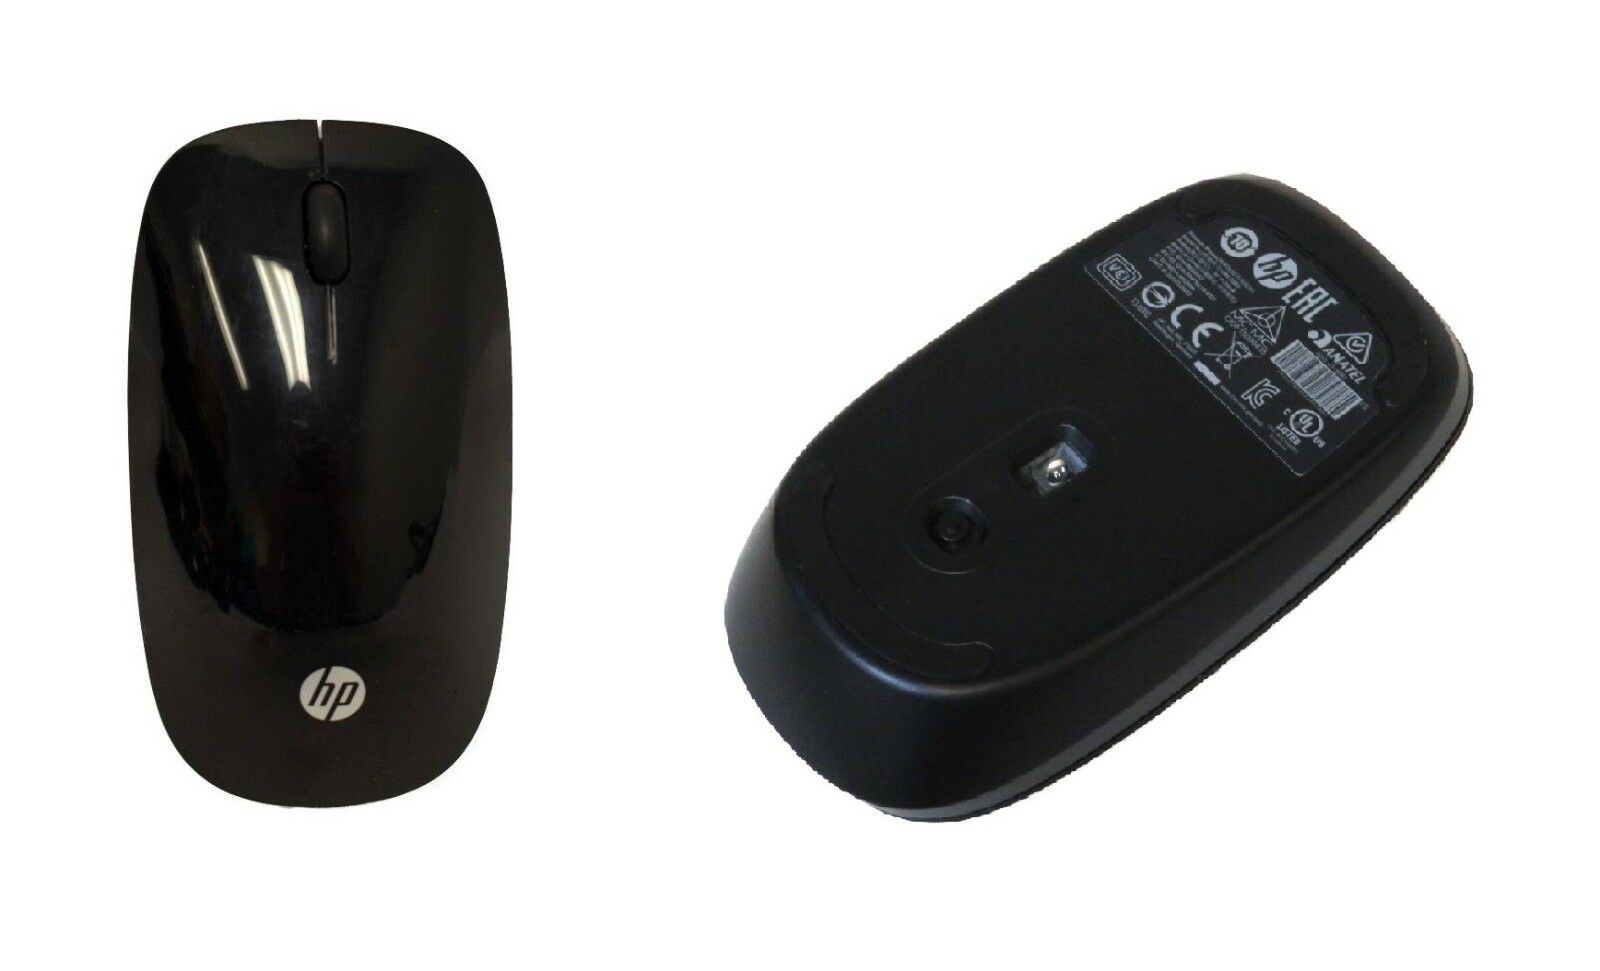 HP 801525-001 MG-1451 Black Wireless Mouse